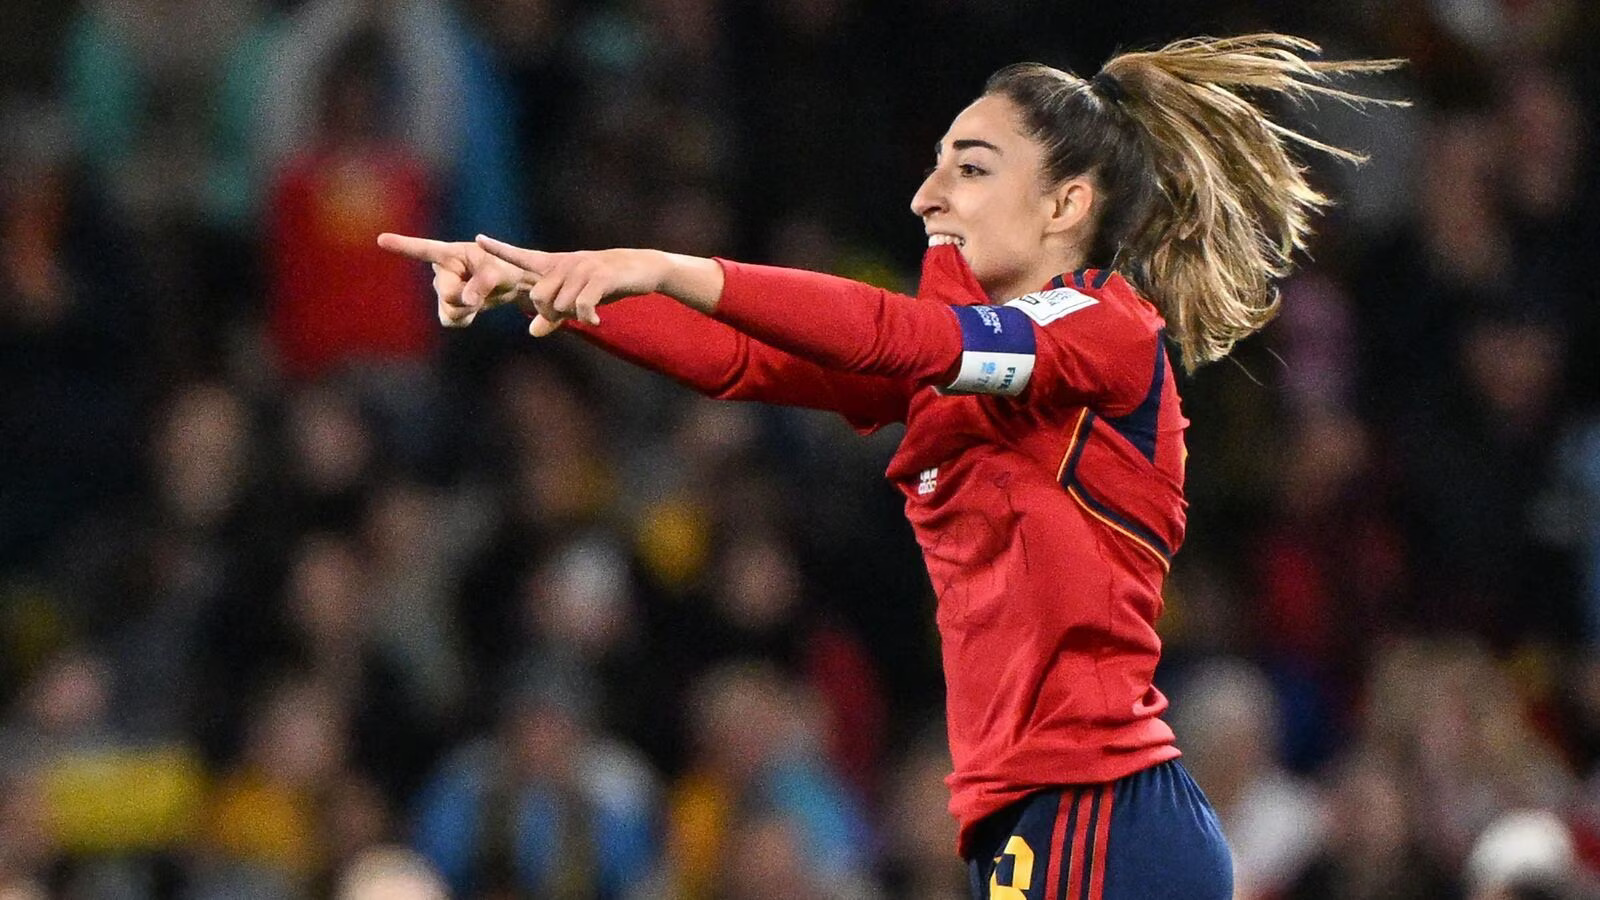 Spain Clinches World Champions Title in Women's Football